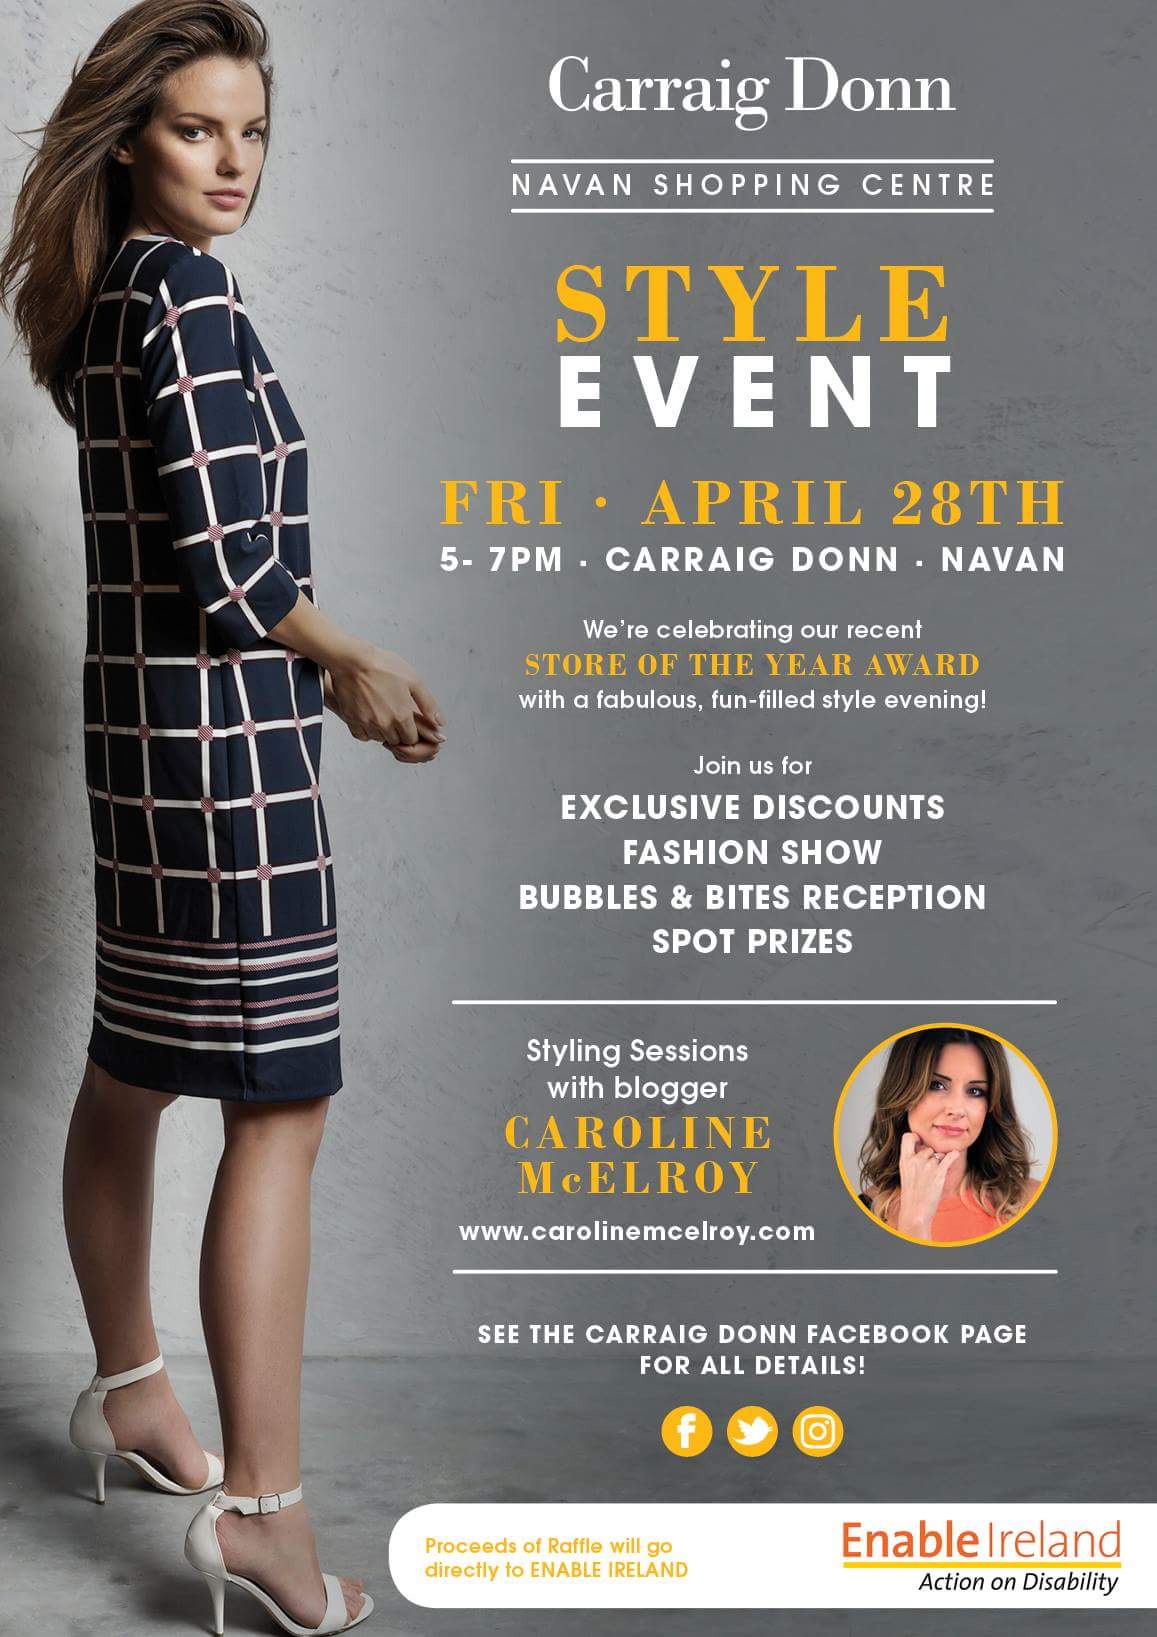 Style night in aid of Enable Ireland at Carraig Donn